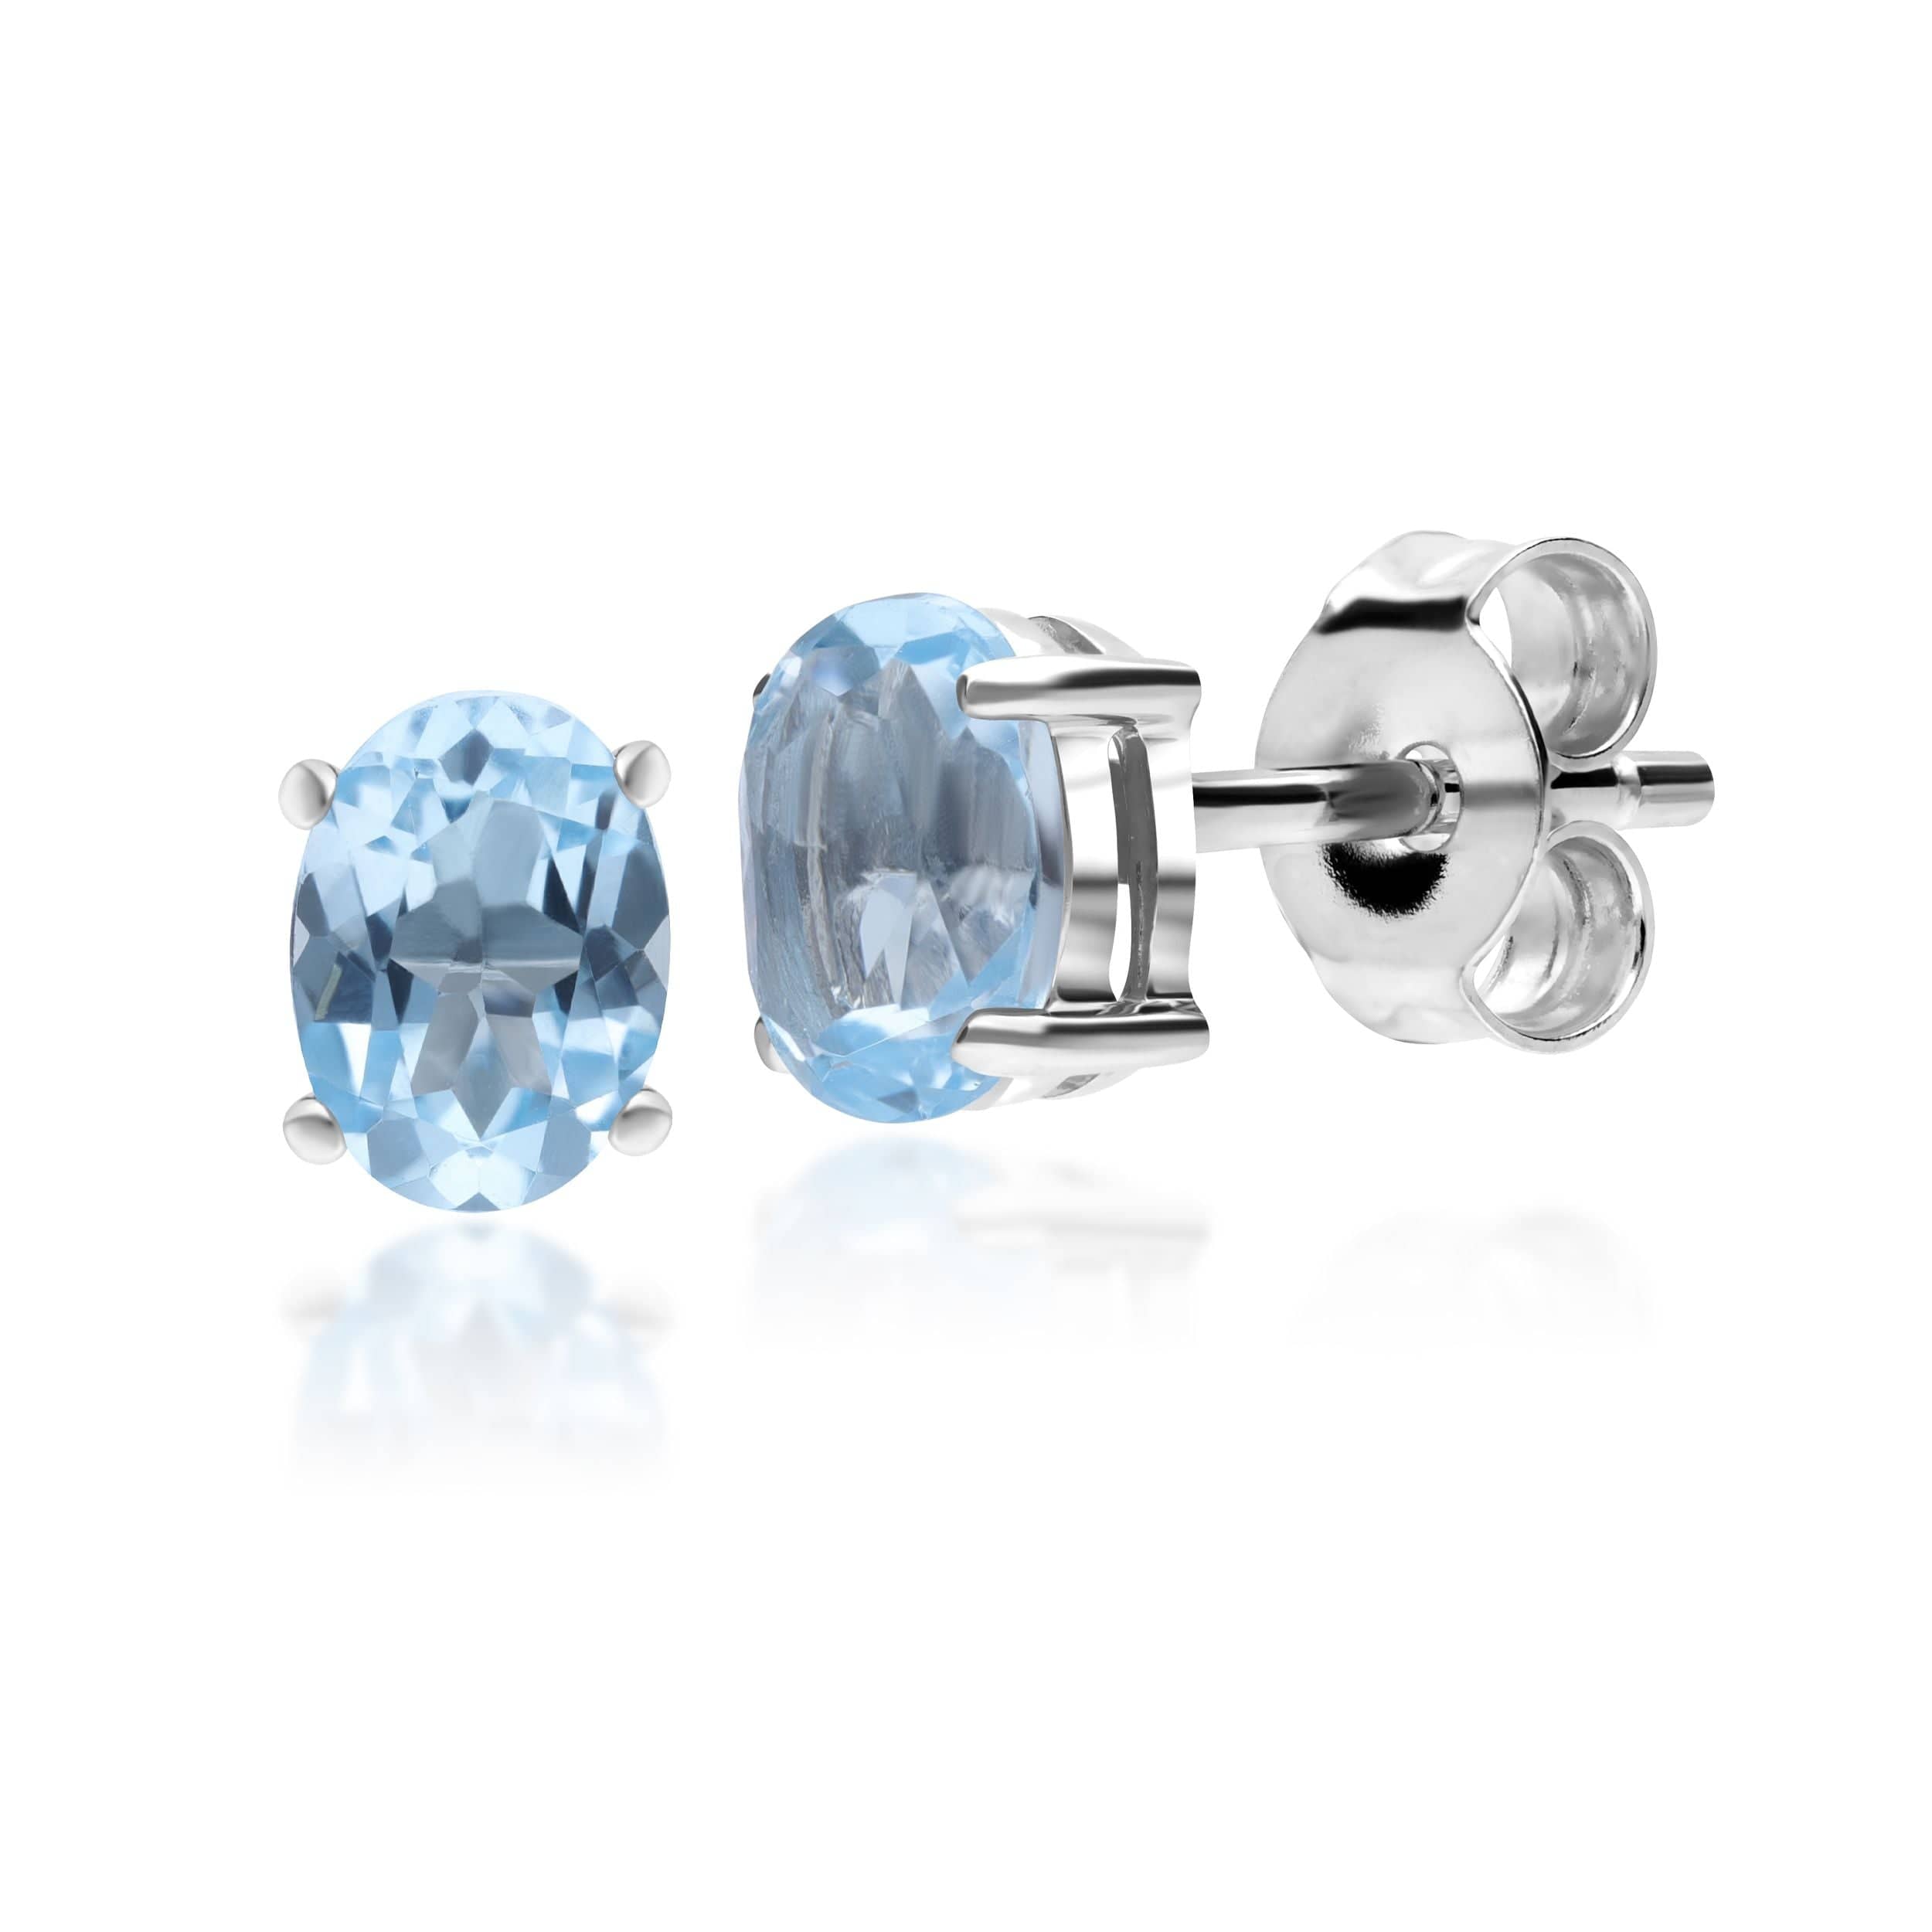 10256 Classic Oval Blue Topaz Stud Earrings in 9ct White Gold 1